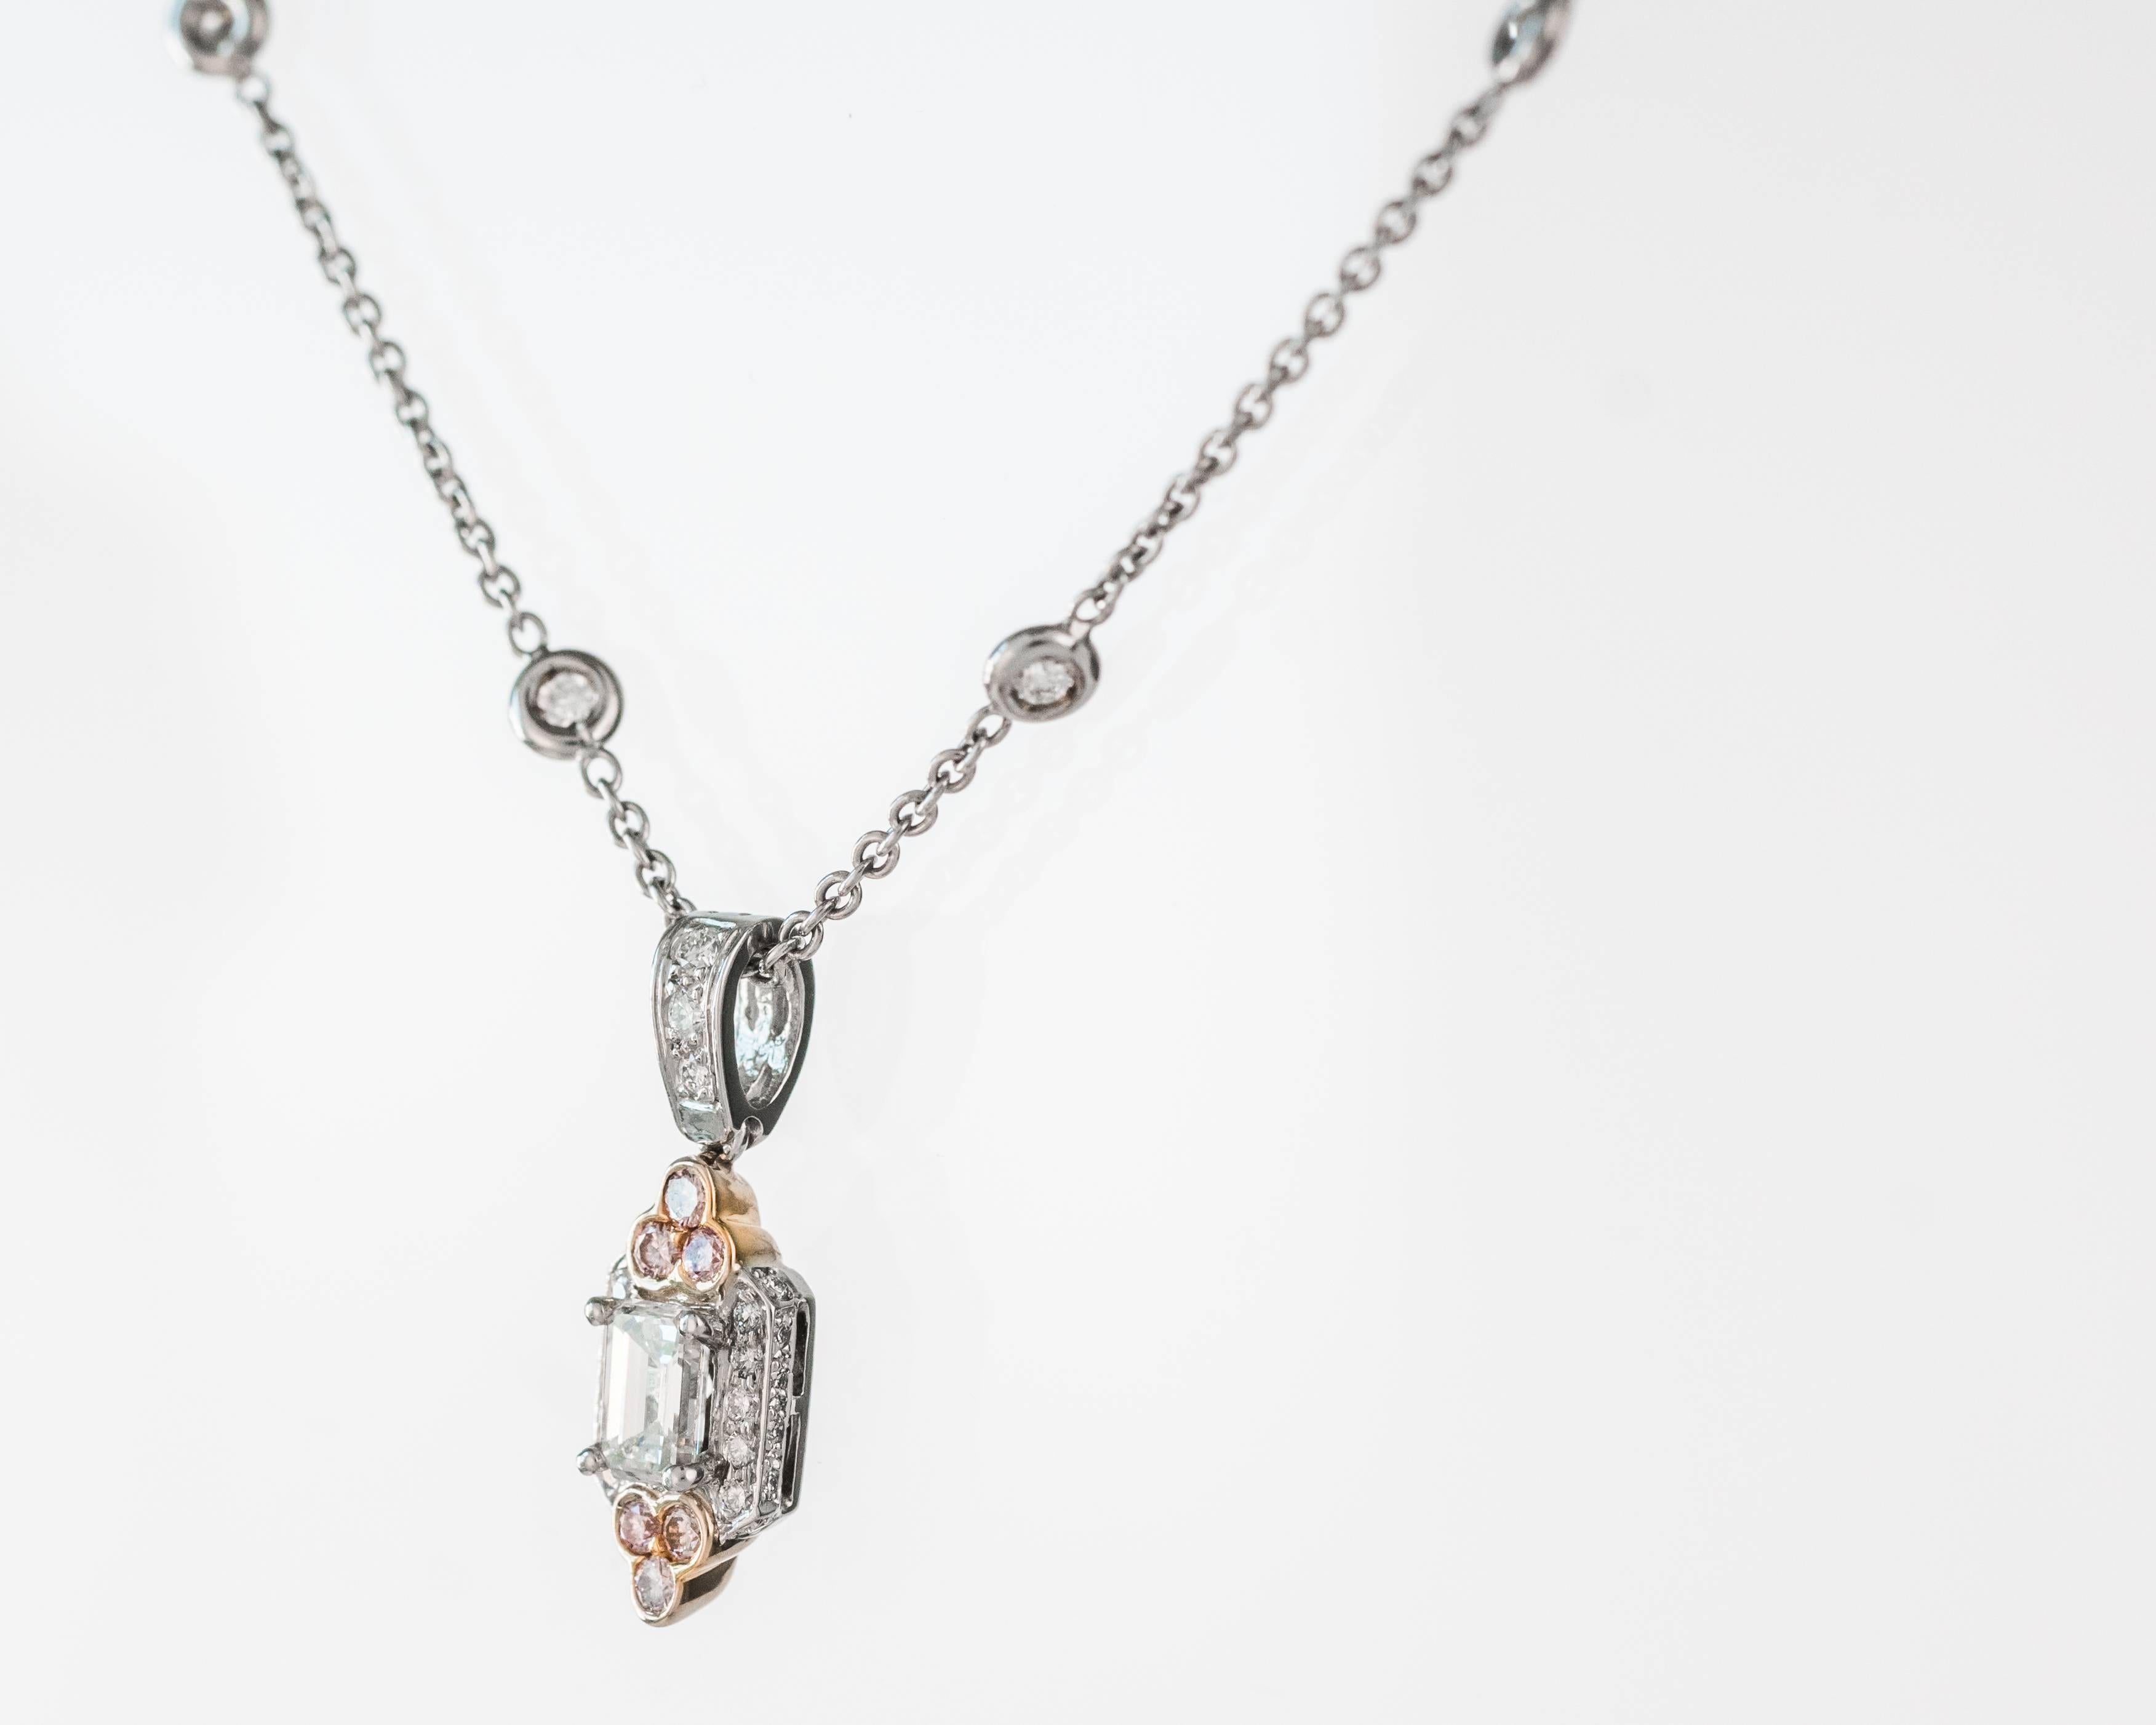 This Charles Krypell Diamond and Fancy Pink Diamond Necklace features diamonds set in Platinum and 18 Karat White Gold. The chain has 10 bezel set white diamonds. The pendant has a .5 carat emerald cut white center diamond  flanked by 10 prong set